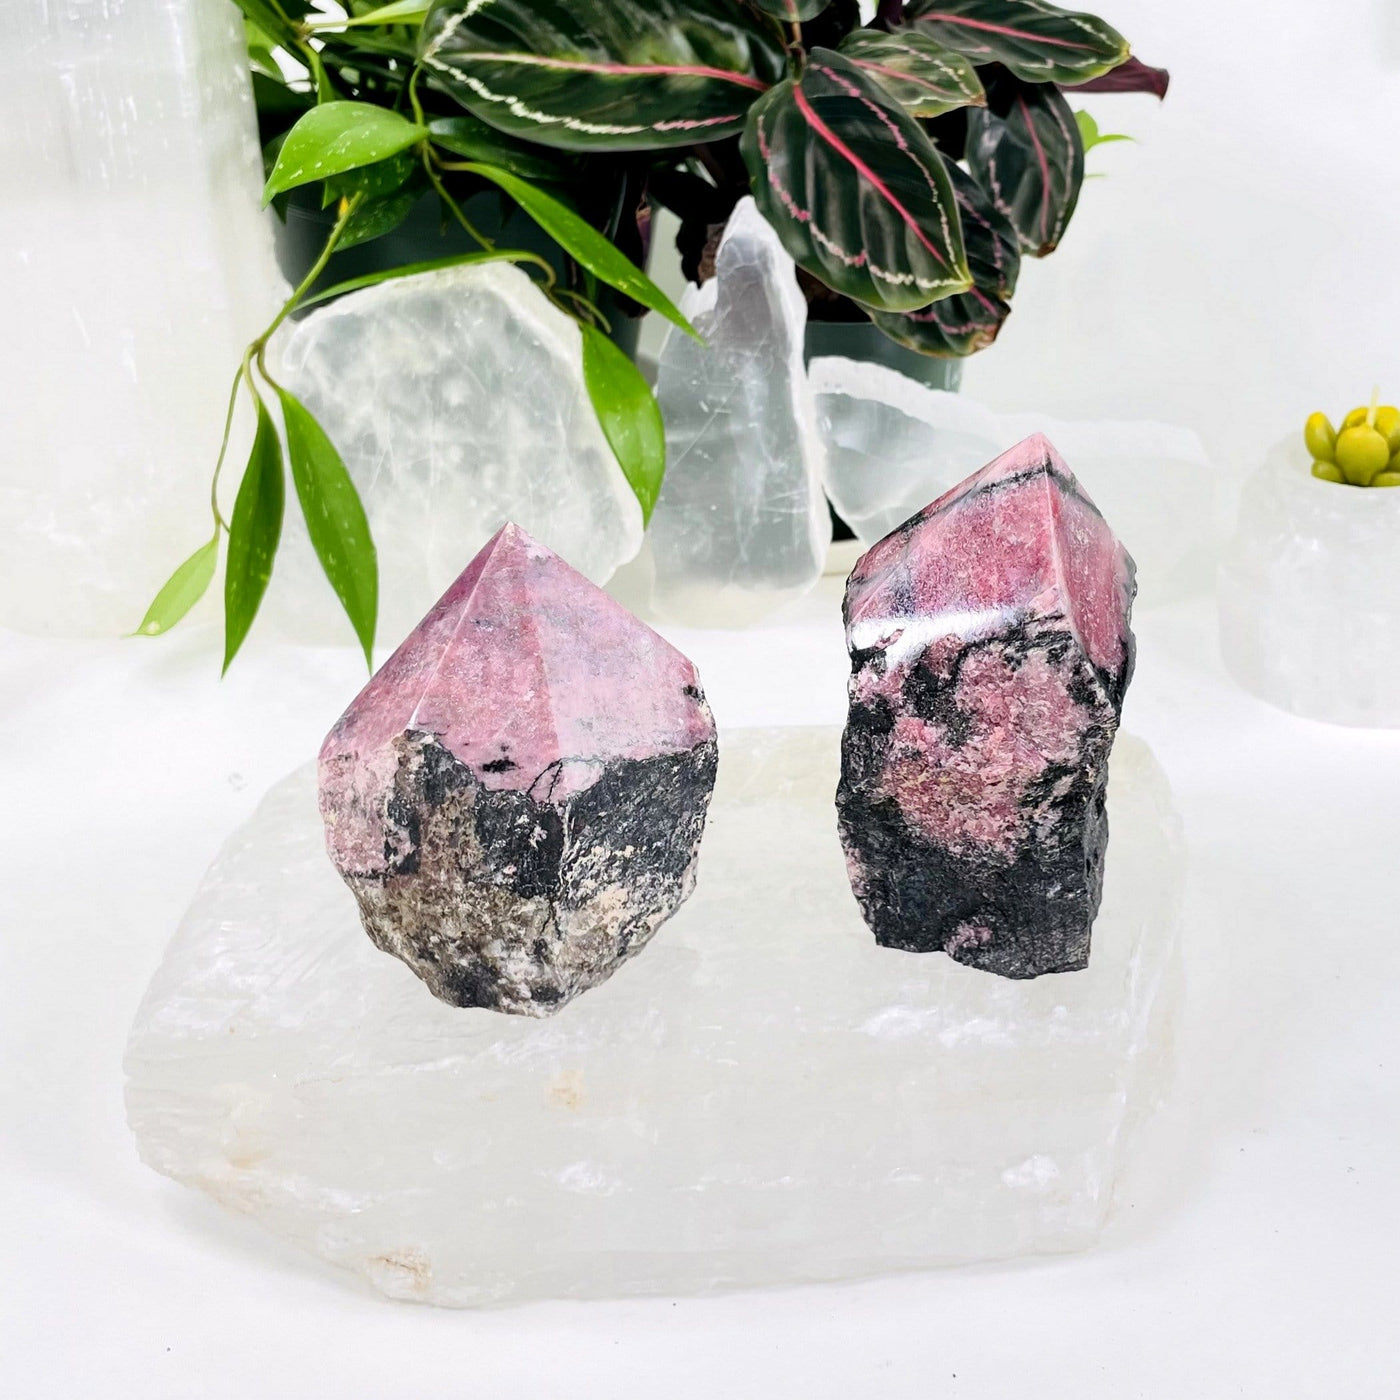 2 Rhodonite Points on a crystal slab with other crystals and plants in the background